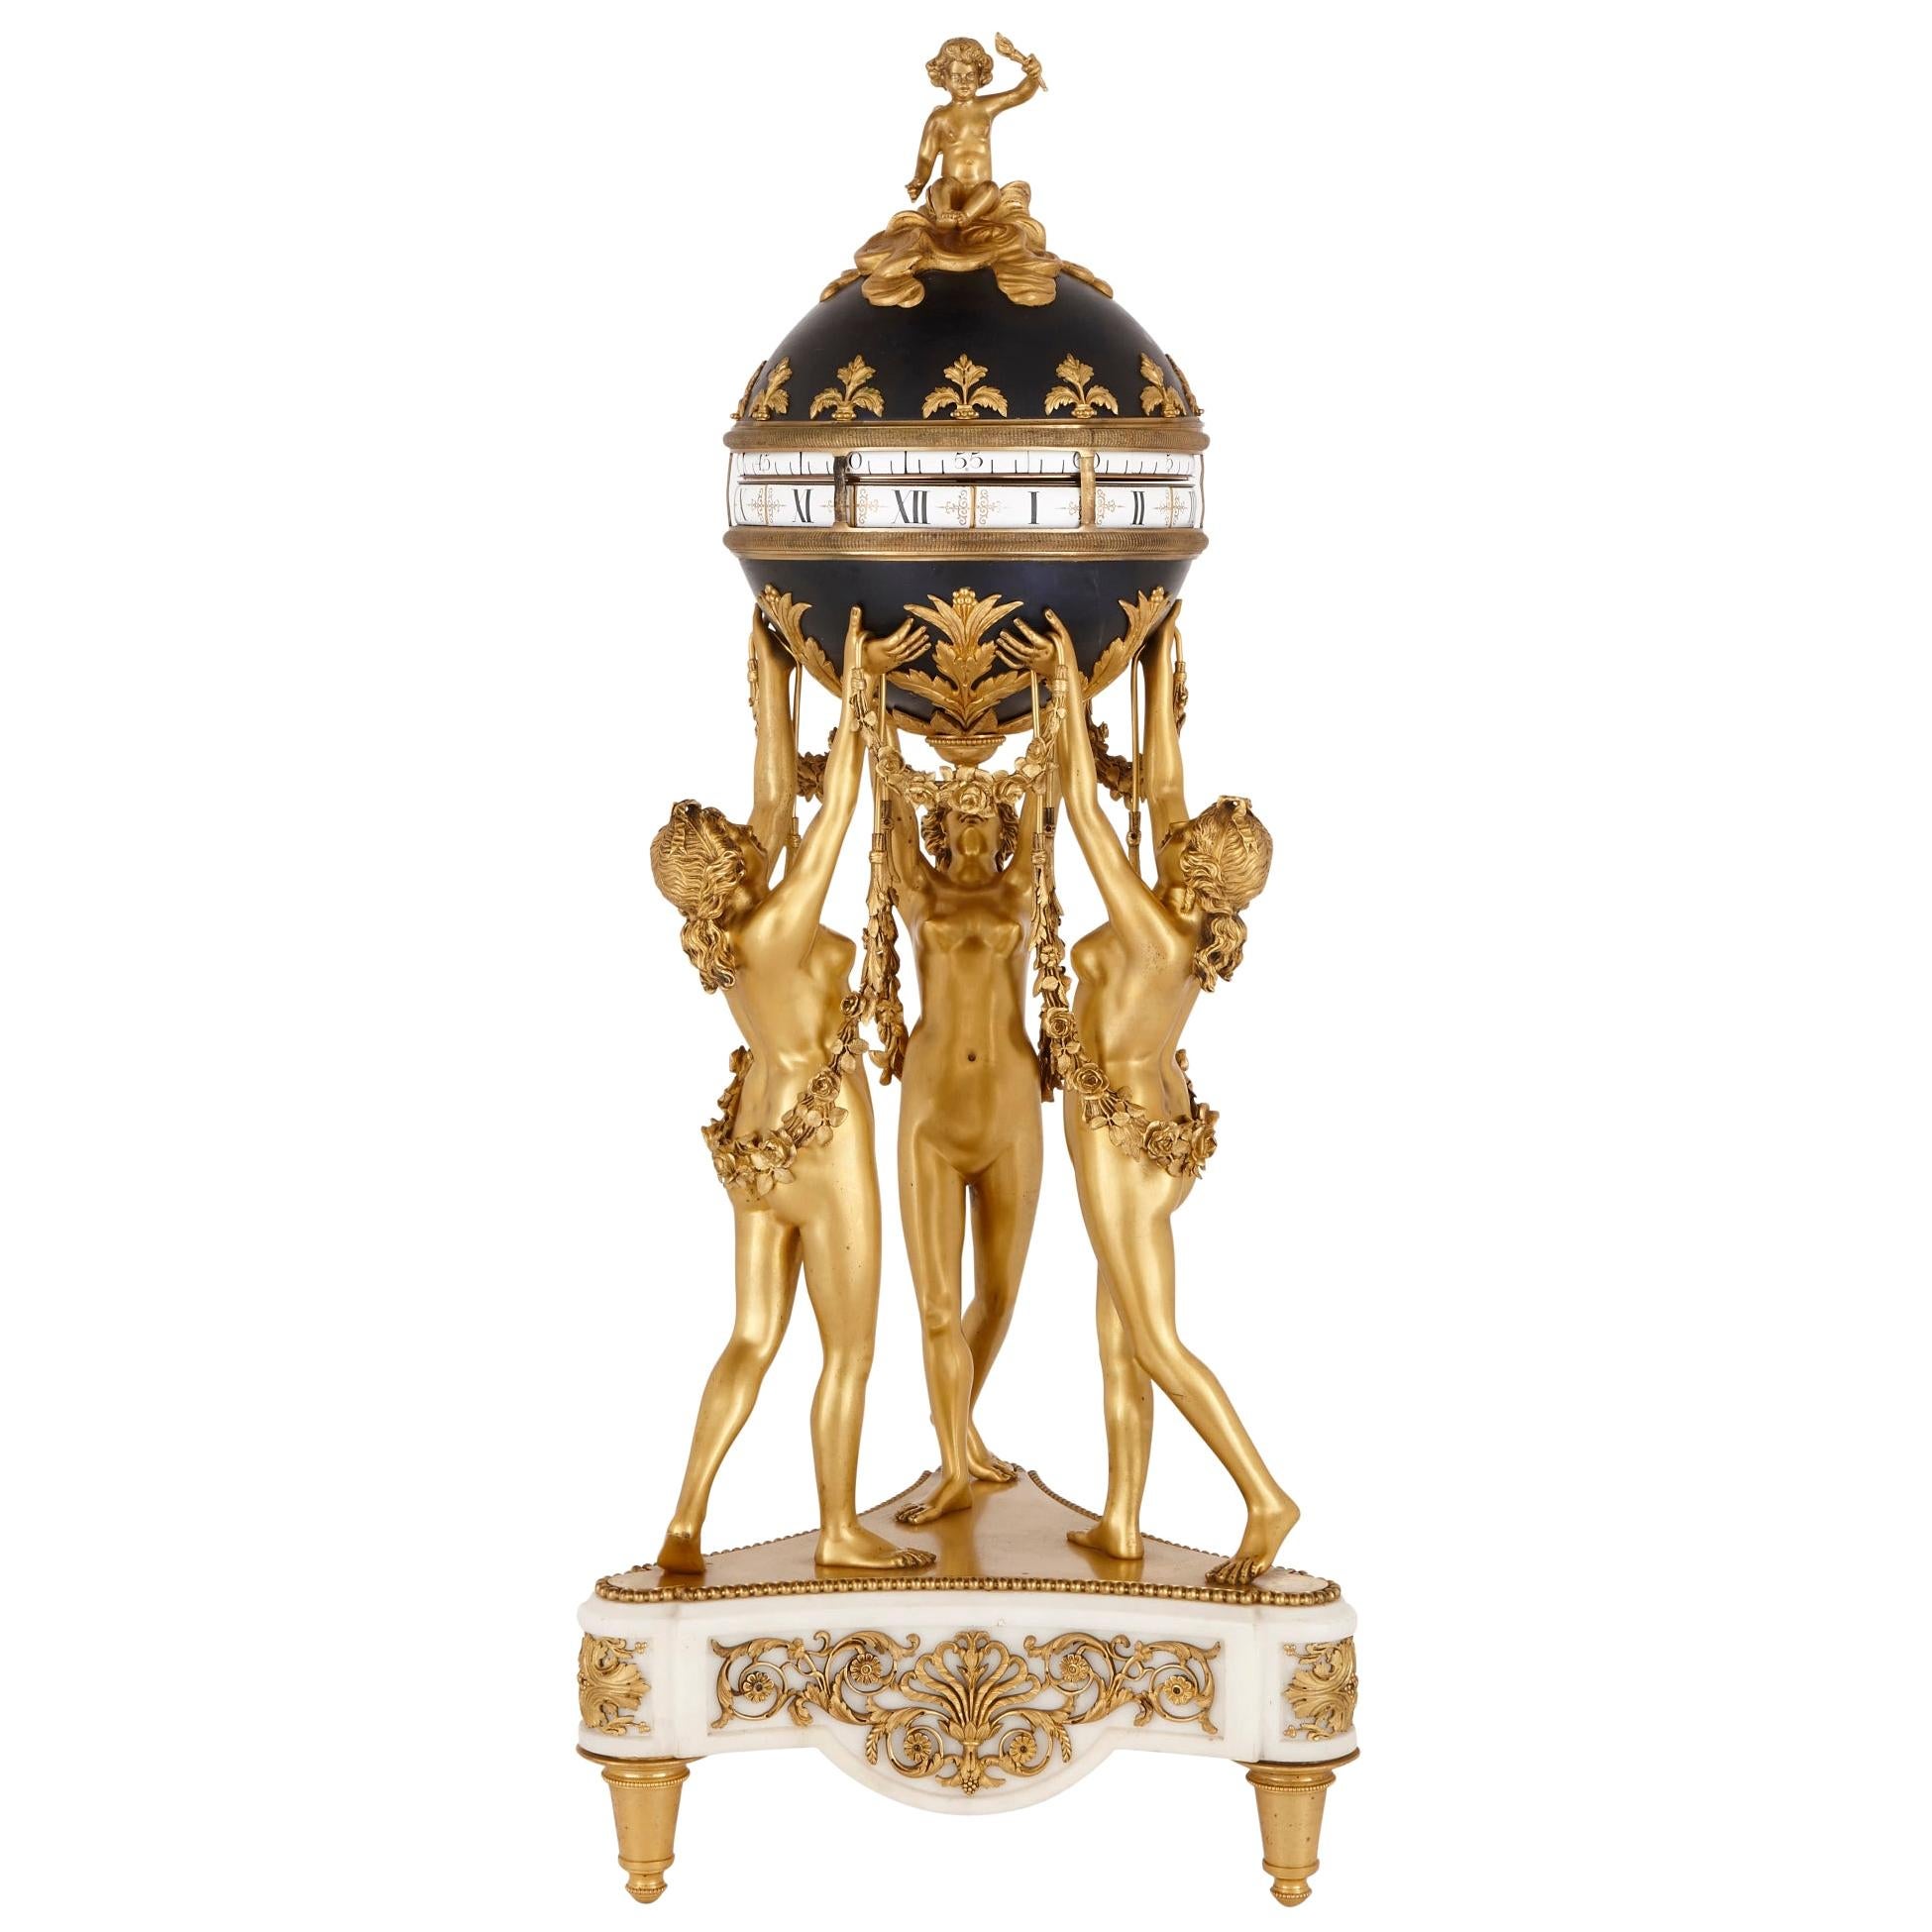 Ormolu, White Marble and Tole Cercle Tournant Mantel Clock by Lepaute